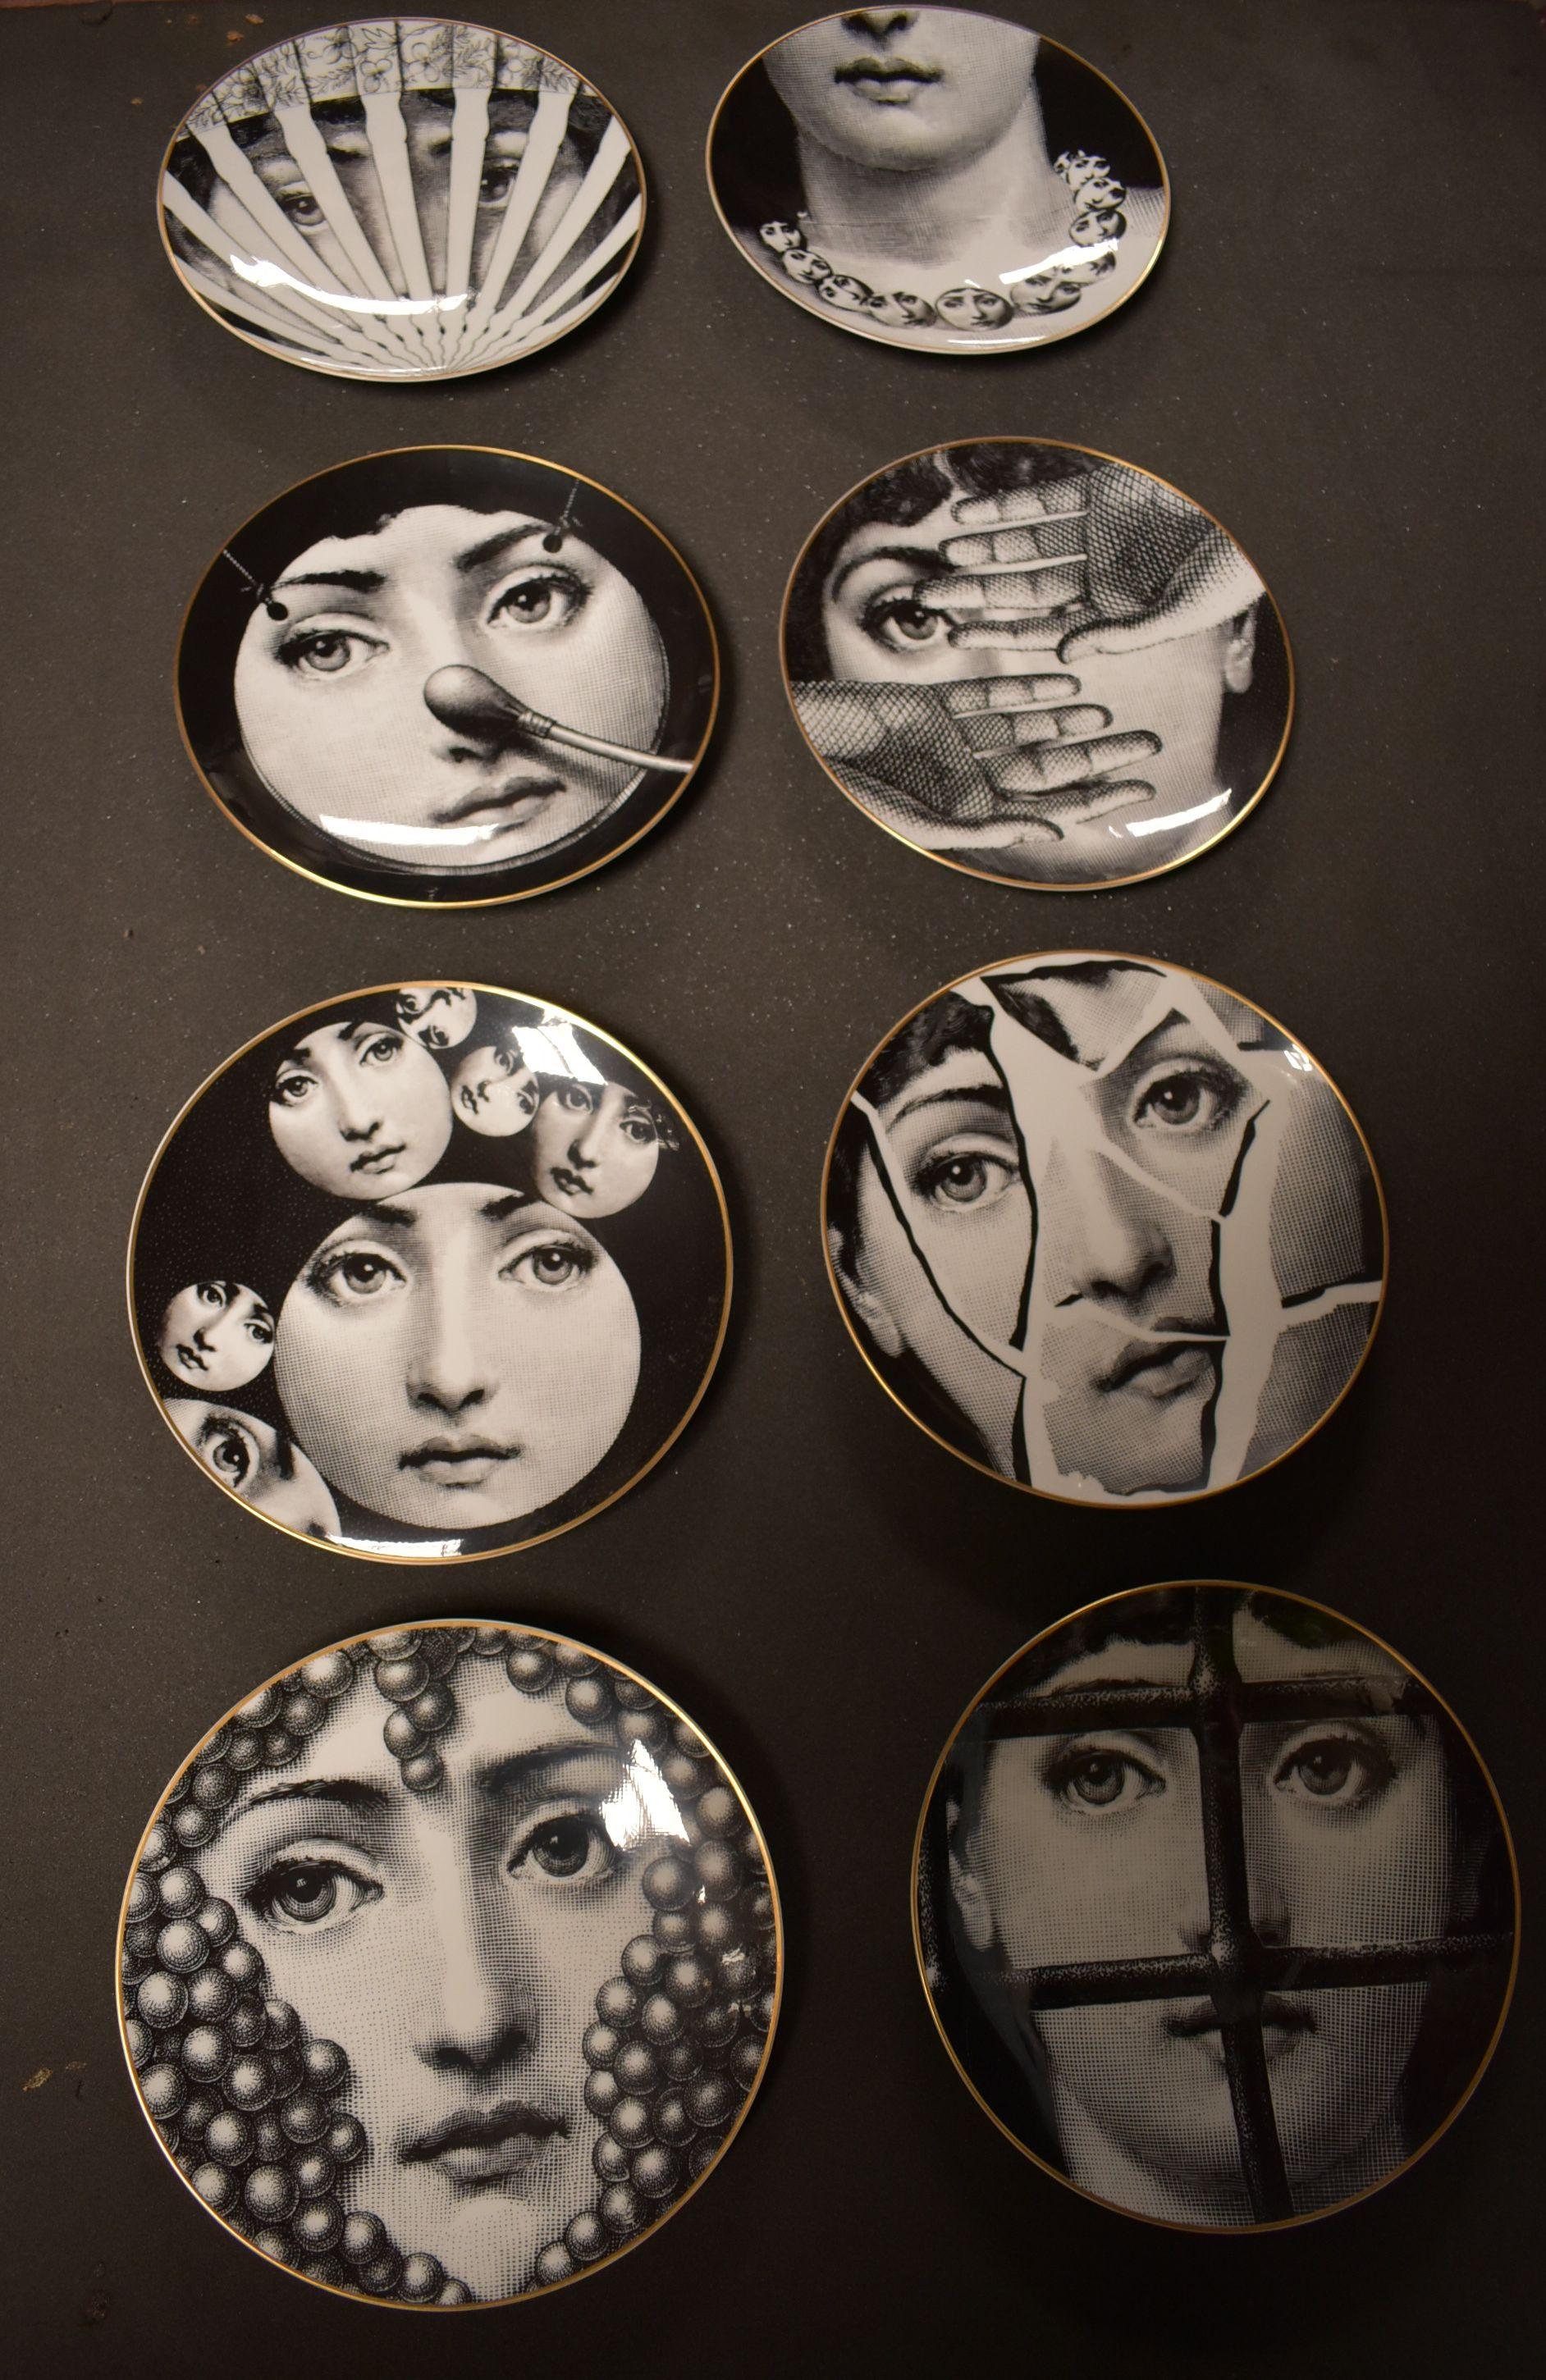 Set of 8 wall display porcelain plates Porcelain Temi E Variazioni design by Piero Fornasetti for Rosenthal with original boxes.